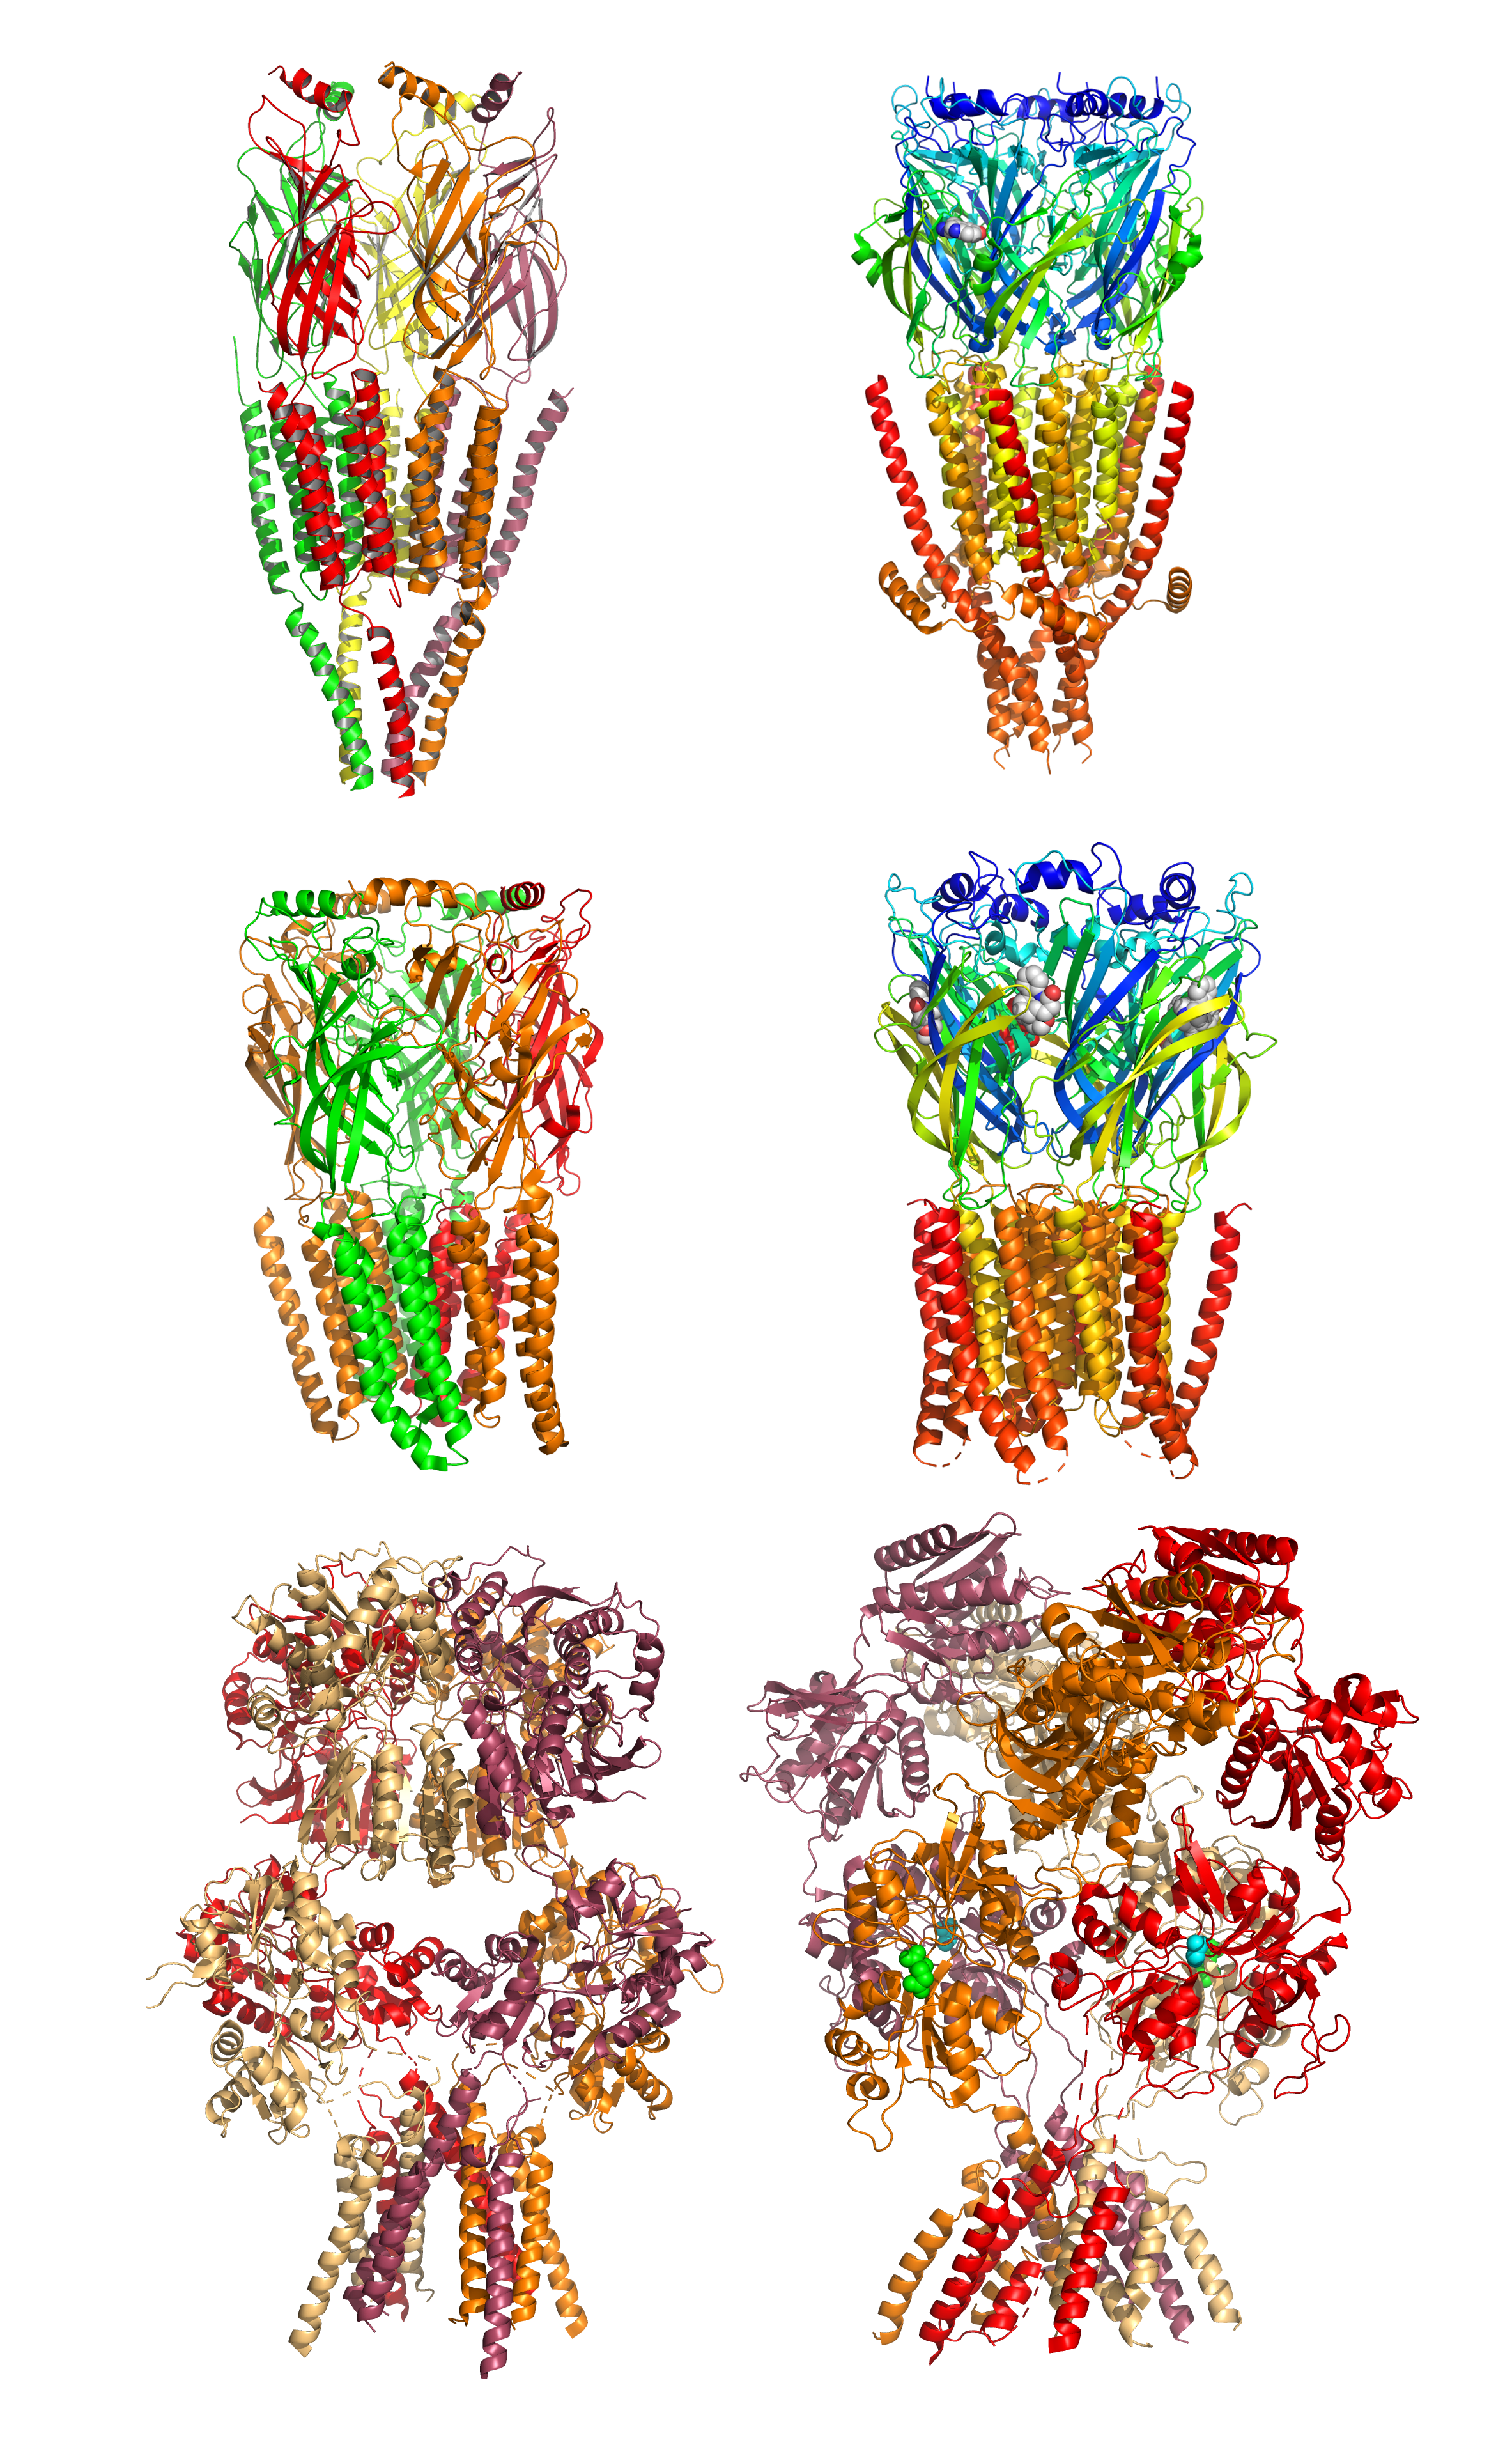 Structures of ligand-gated ion channels. Top row: The nicotinic acetylcholine receptor (left) and the serotonin 5-HT3 receptor. Middle row: The GABAA receptor (left) and glycine receptor (rigt). Bottom row: The AMPA receptor (left) and NMDA receptor (reight). Data from PDB 2BG9, PDB 6HIO, PDB 6D6U, PDB 3JAD, PDB 5IDE, and PDB 4PE5, rendered with open source molecular visualization tool PyMol.